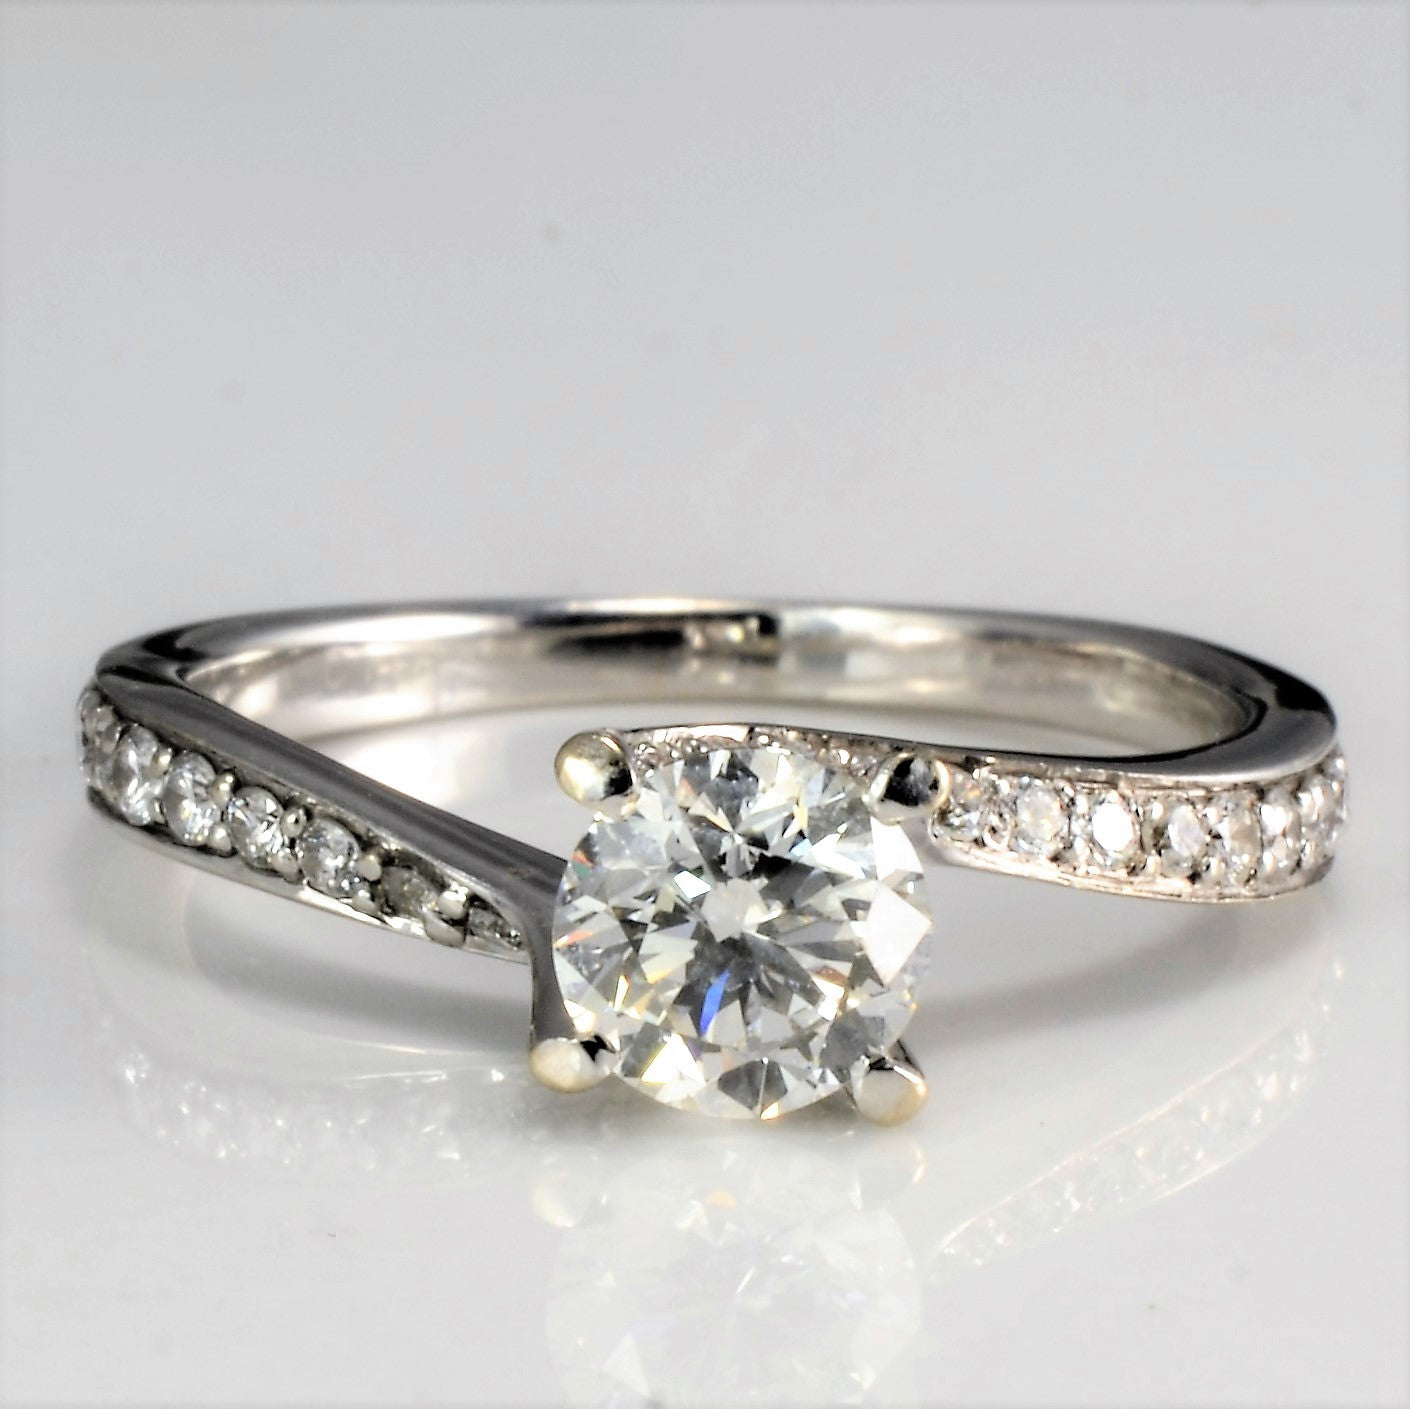 Solitaire with Accents Canadian Diamond Engagement Ring | 0.73 ctw, SZ 4.75 |